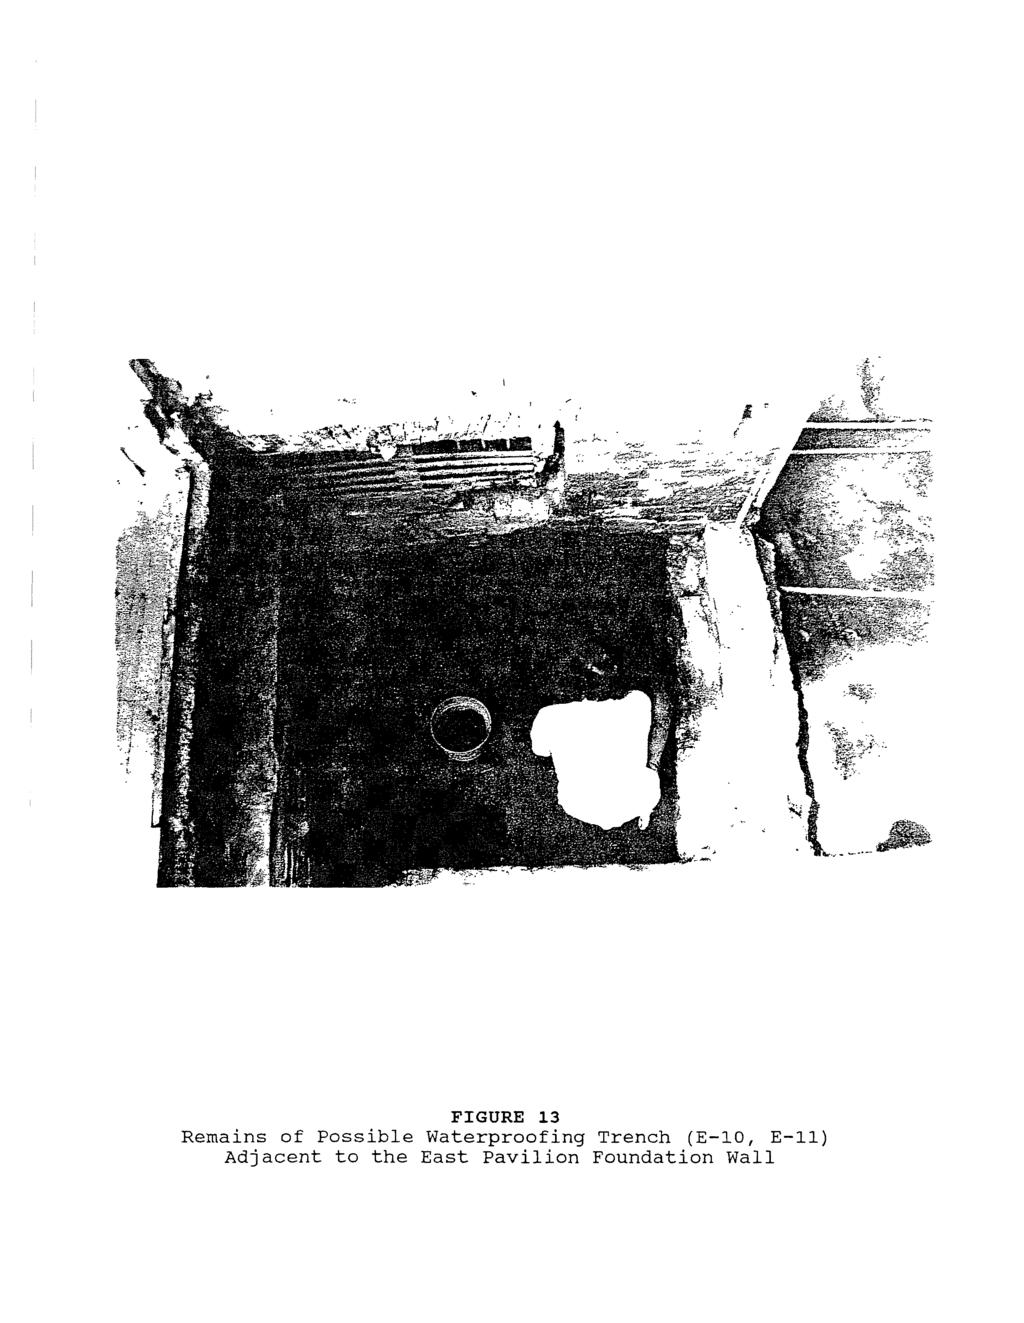 FIGURE 13 Remains of possible Waterproofing Trench